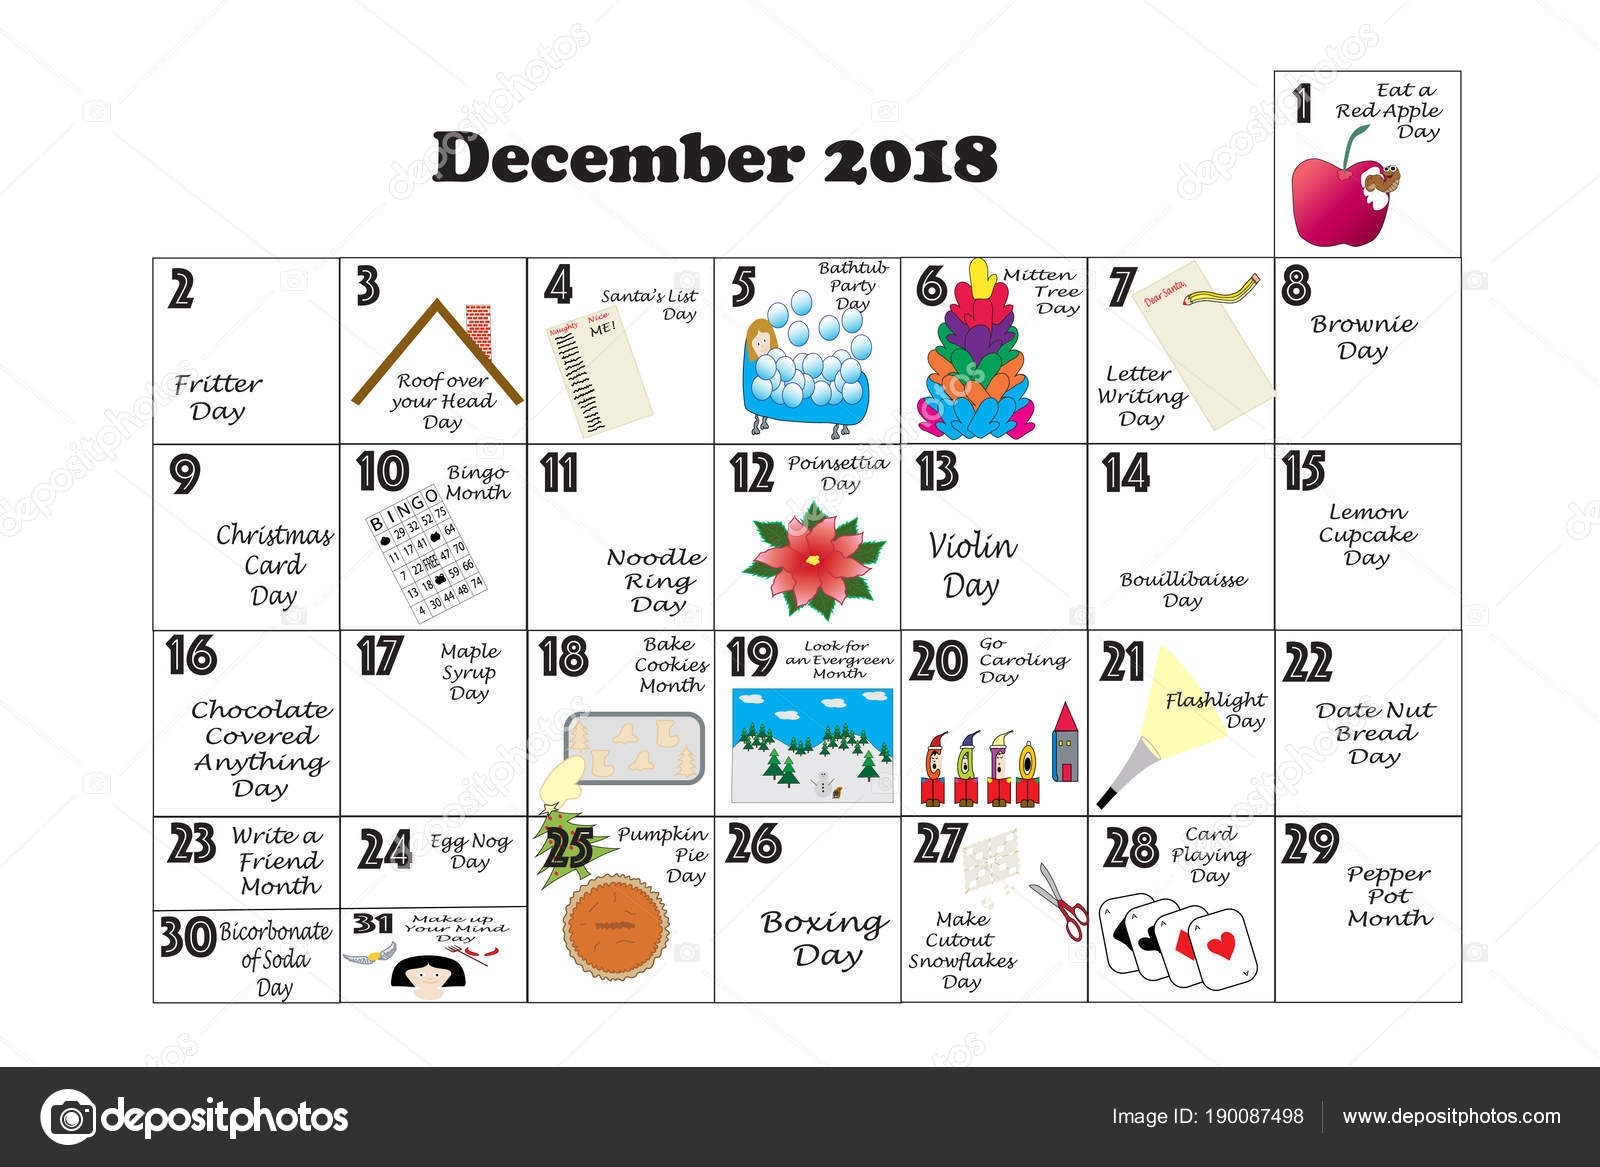 December 2018 Monthly Calendar Illustrated Annotated Daily Quirky Calendar Holidays In December